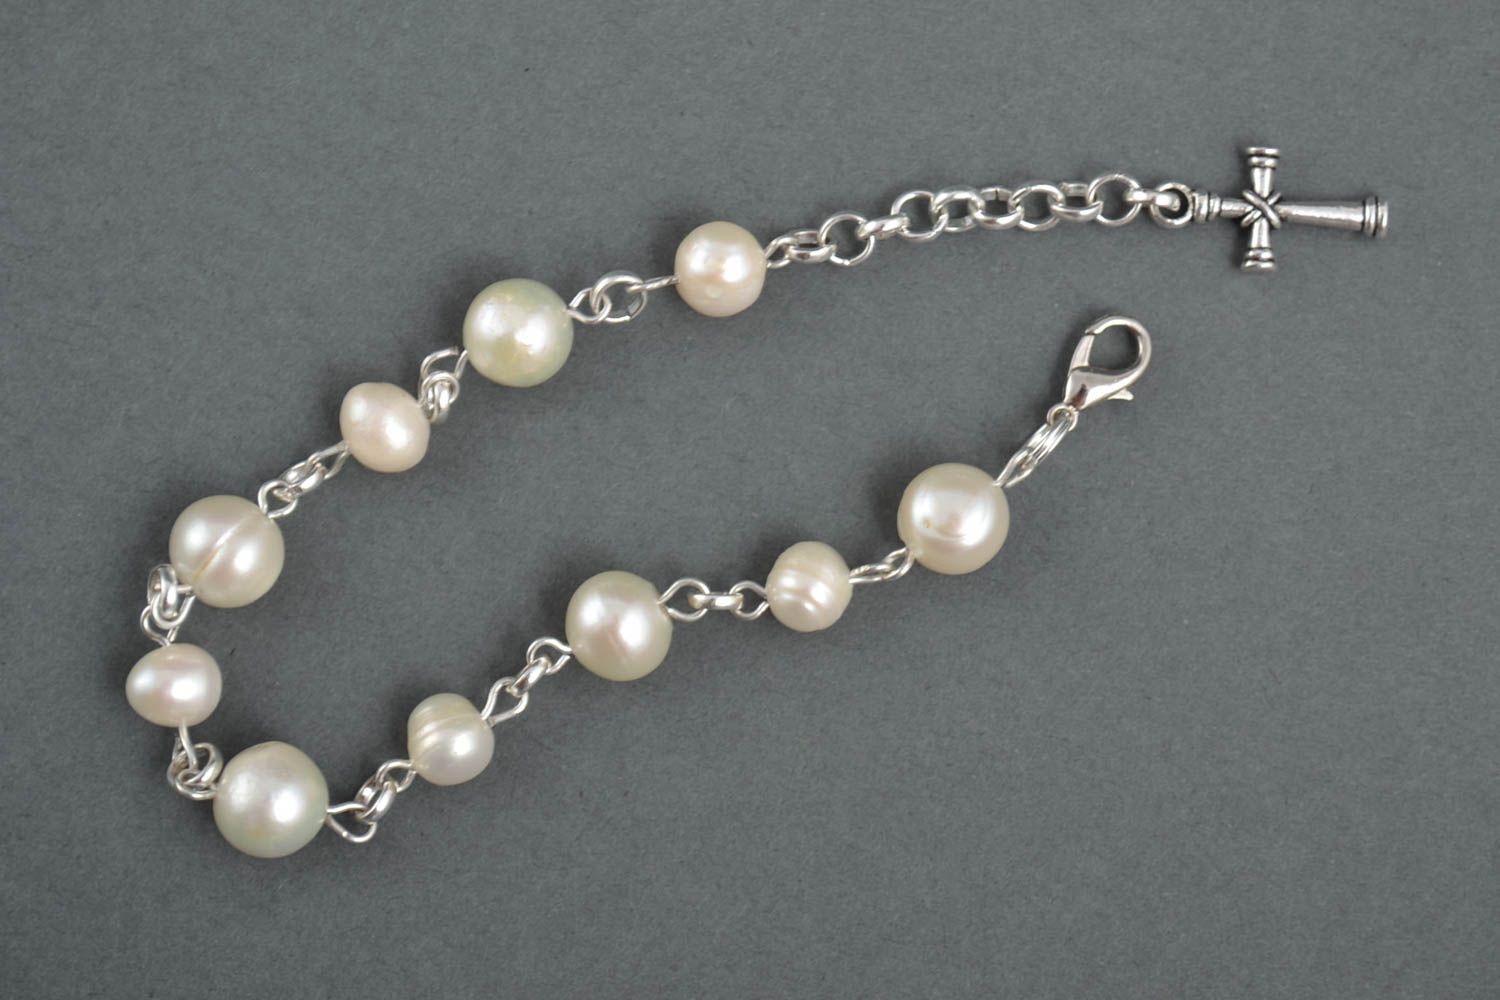 Pearl bracelet handcrafted jewelry charm bracelet fashion accessories gift ideas photo 2